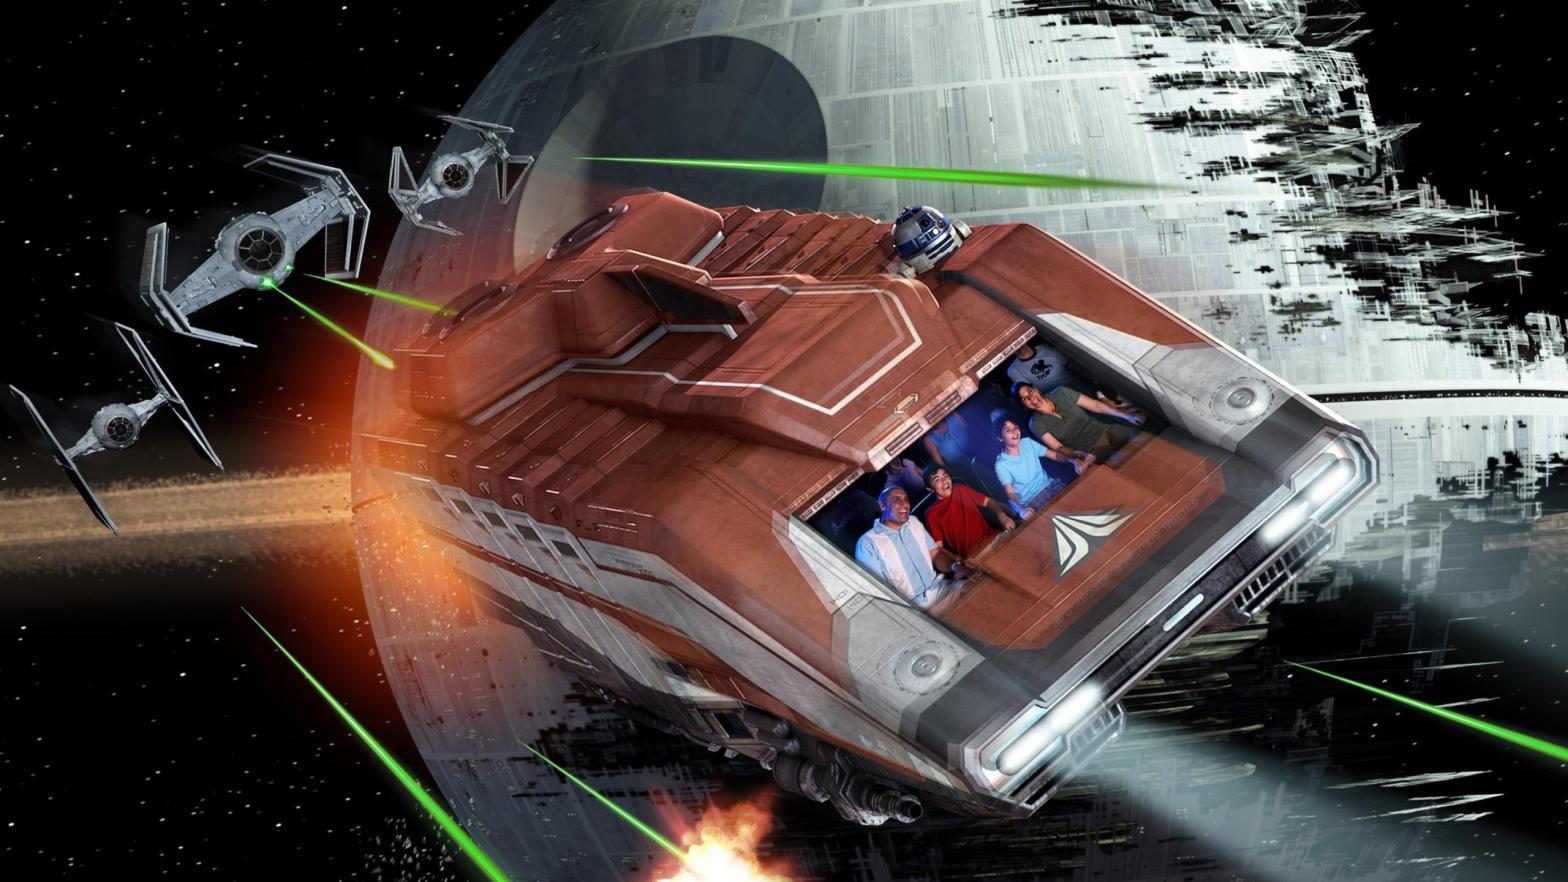 Star Tours is one of the subjects of a new Disney+ documentary series. (Image: Disney+)